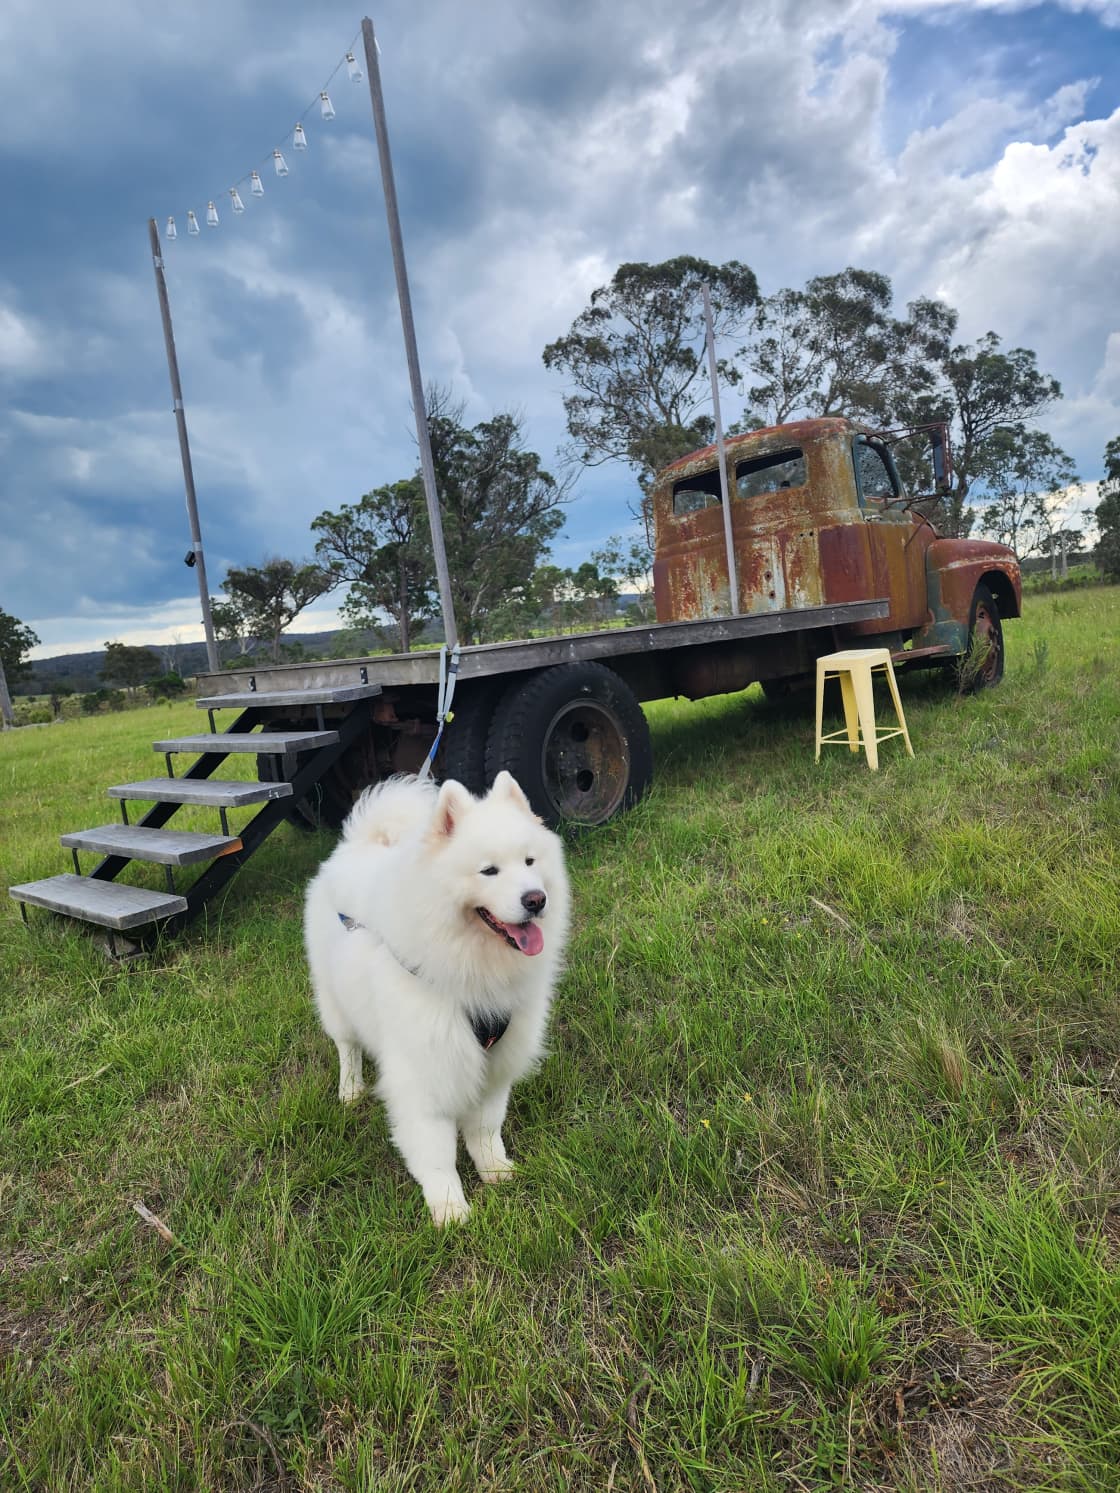 Doggo and the flatbed truck